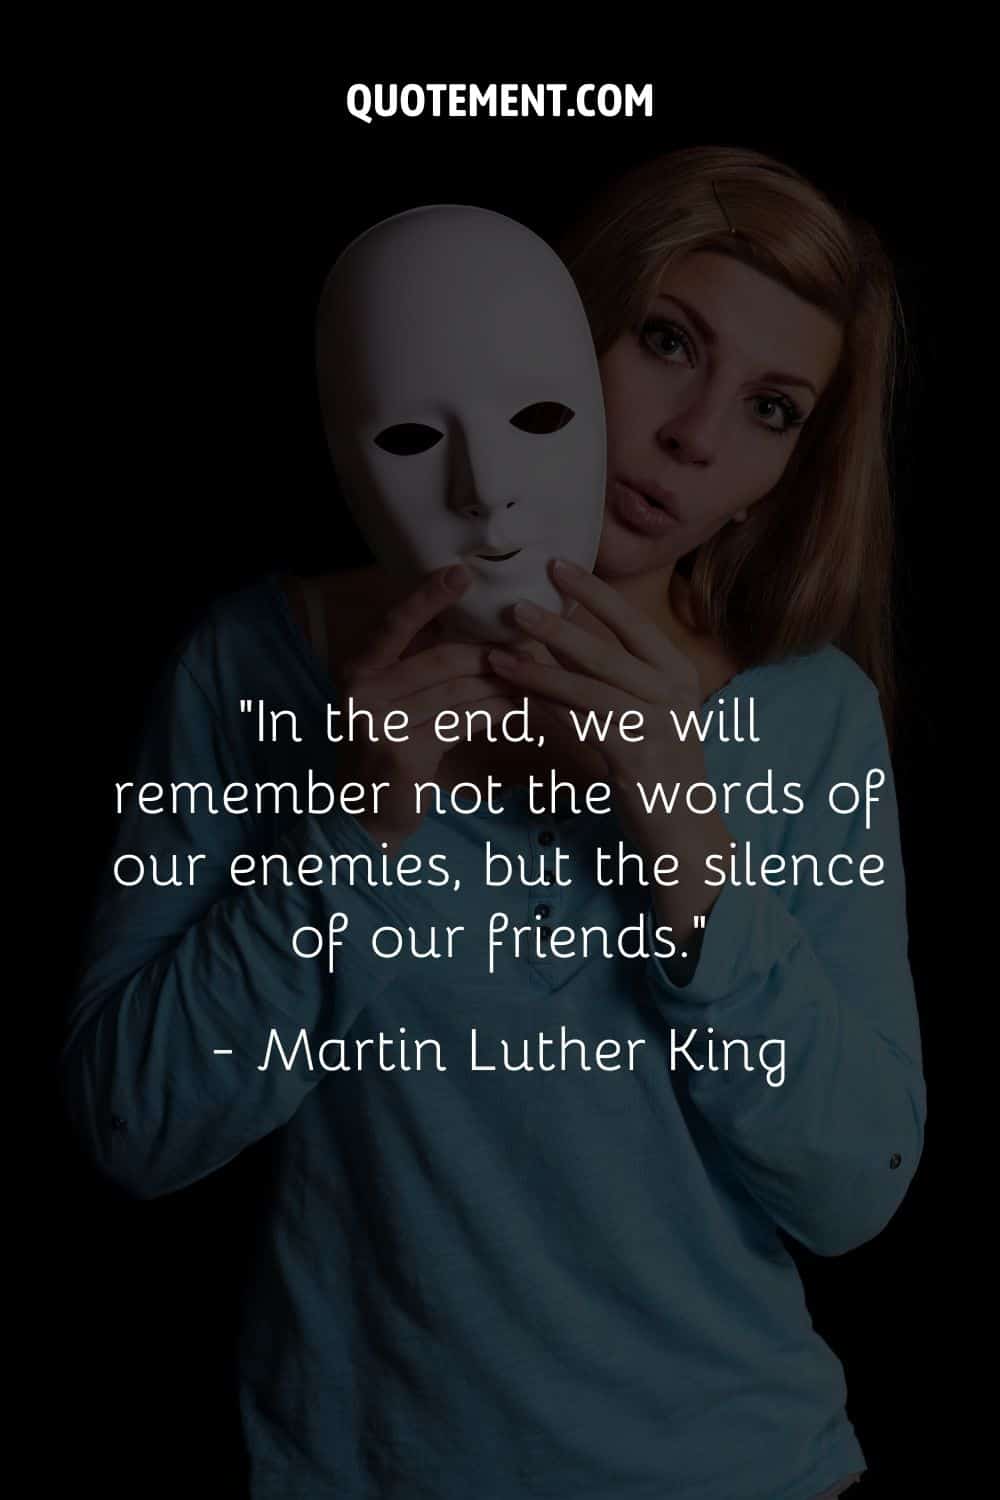 “In the end, we will remember not the words of our enemies, but the silence of our friends.” — Martin Luther King